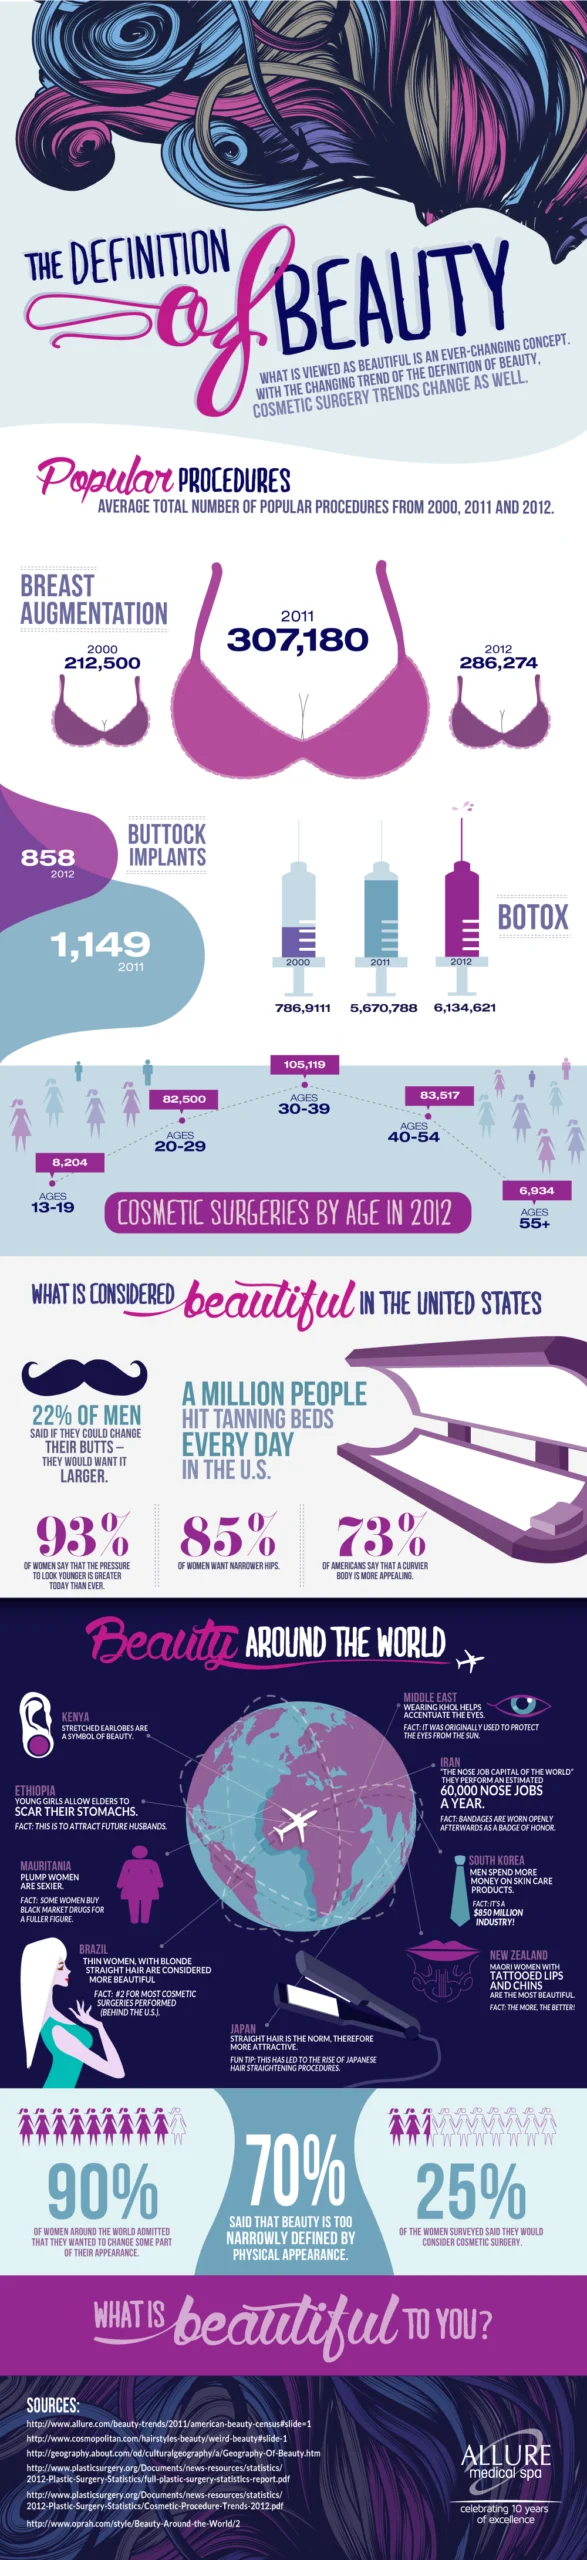 The Definition Of Beauty [InfoGraphic]
